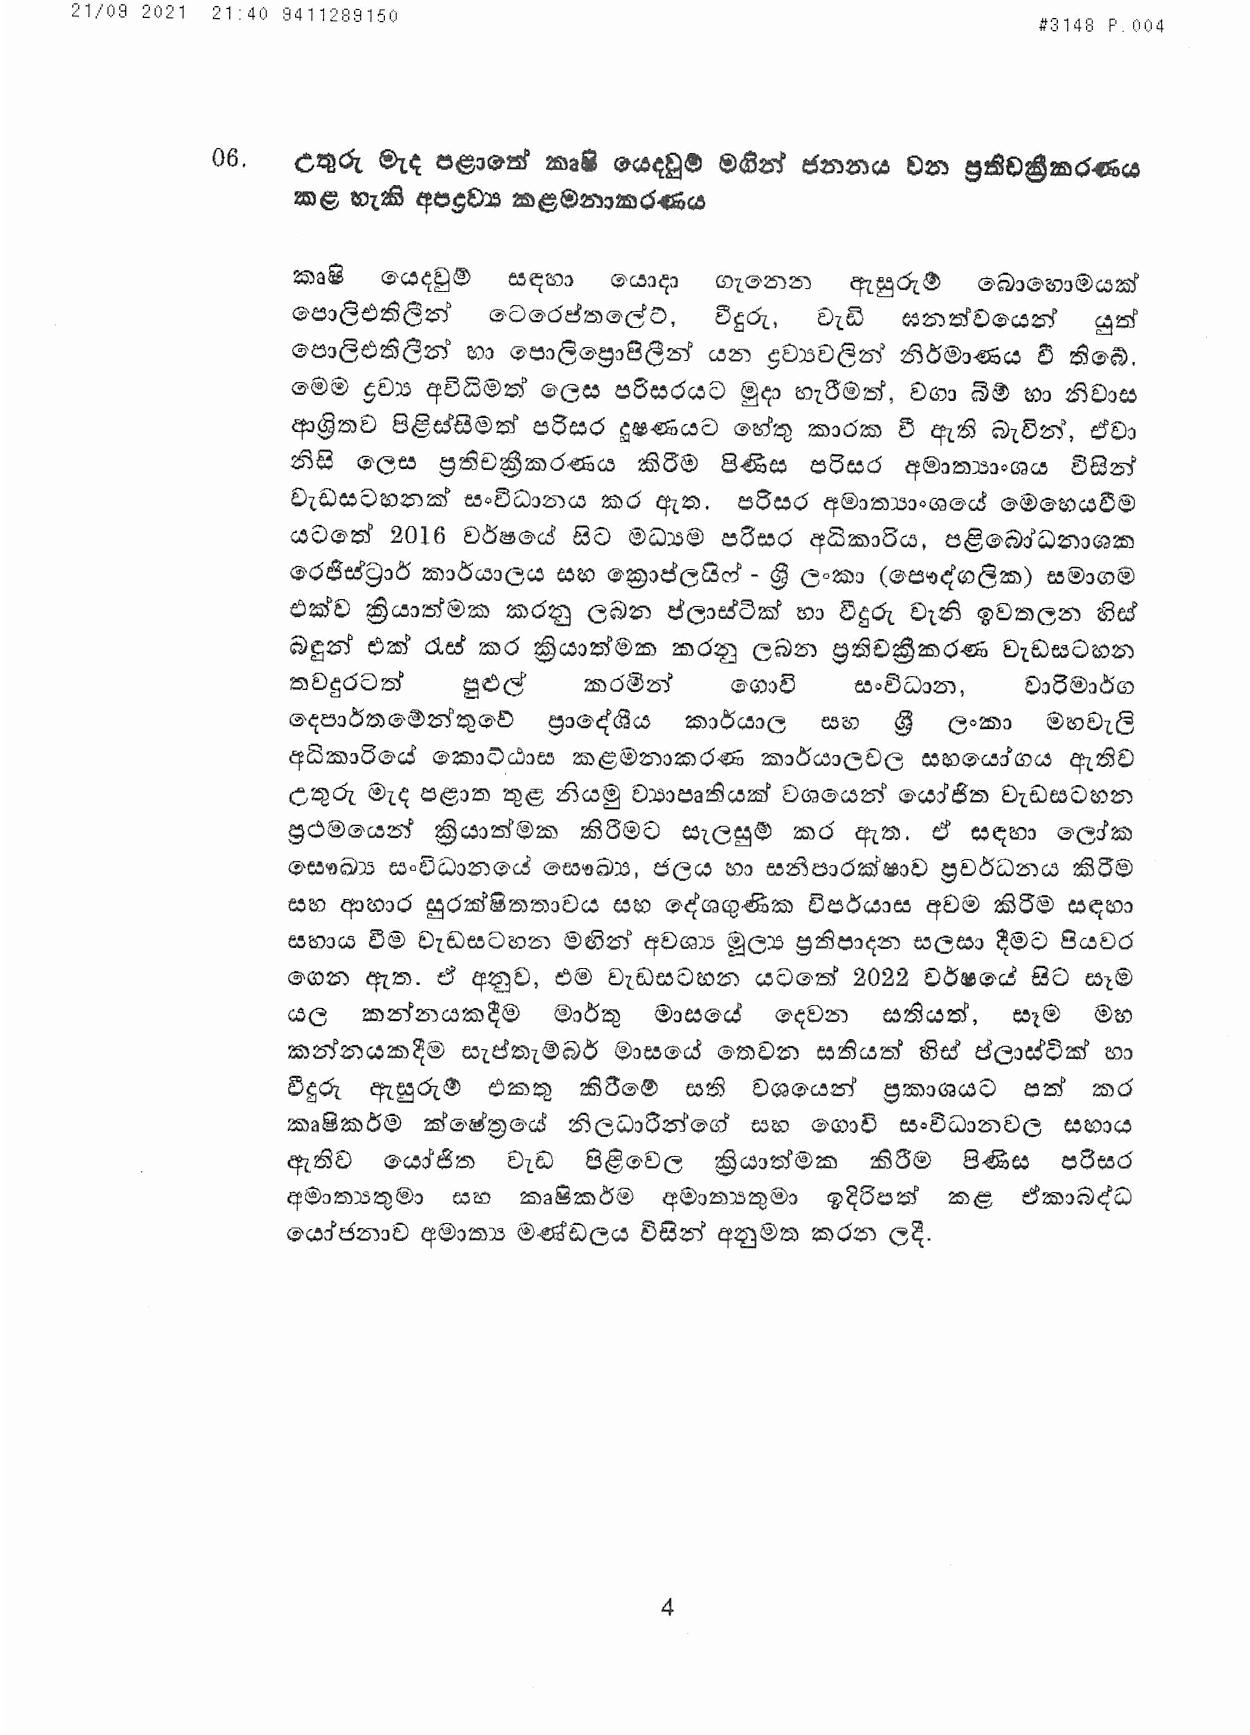 Cabinet Decisions on 21.09.2021 page 004